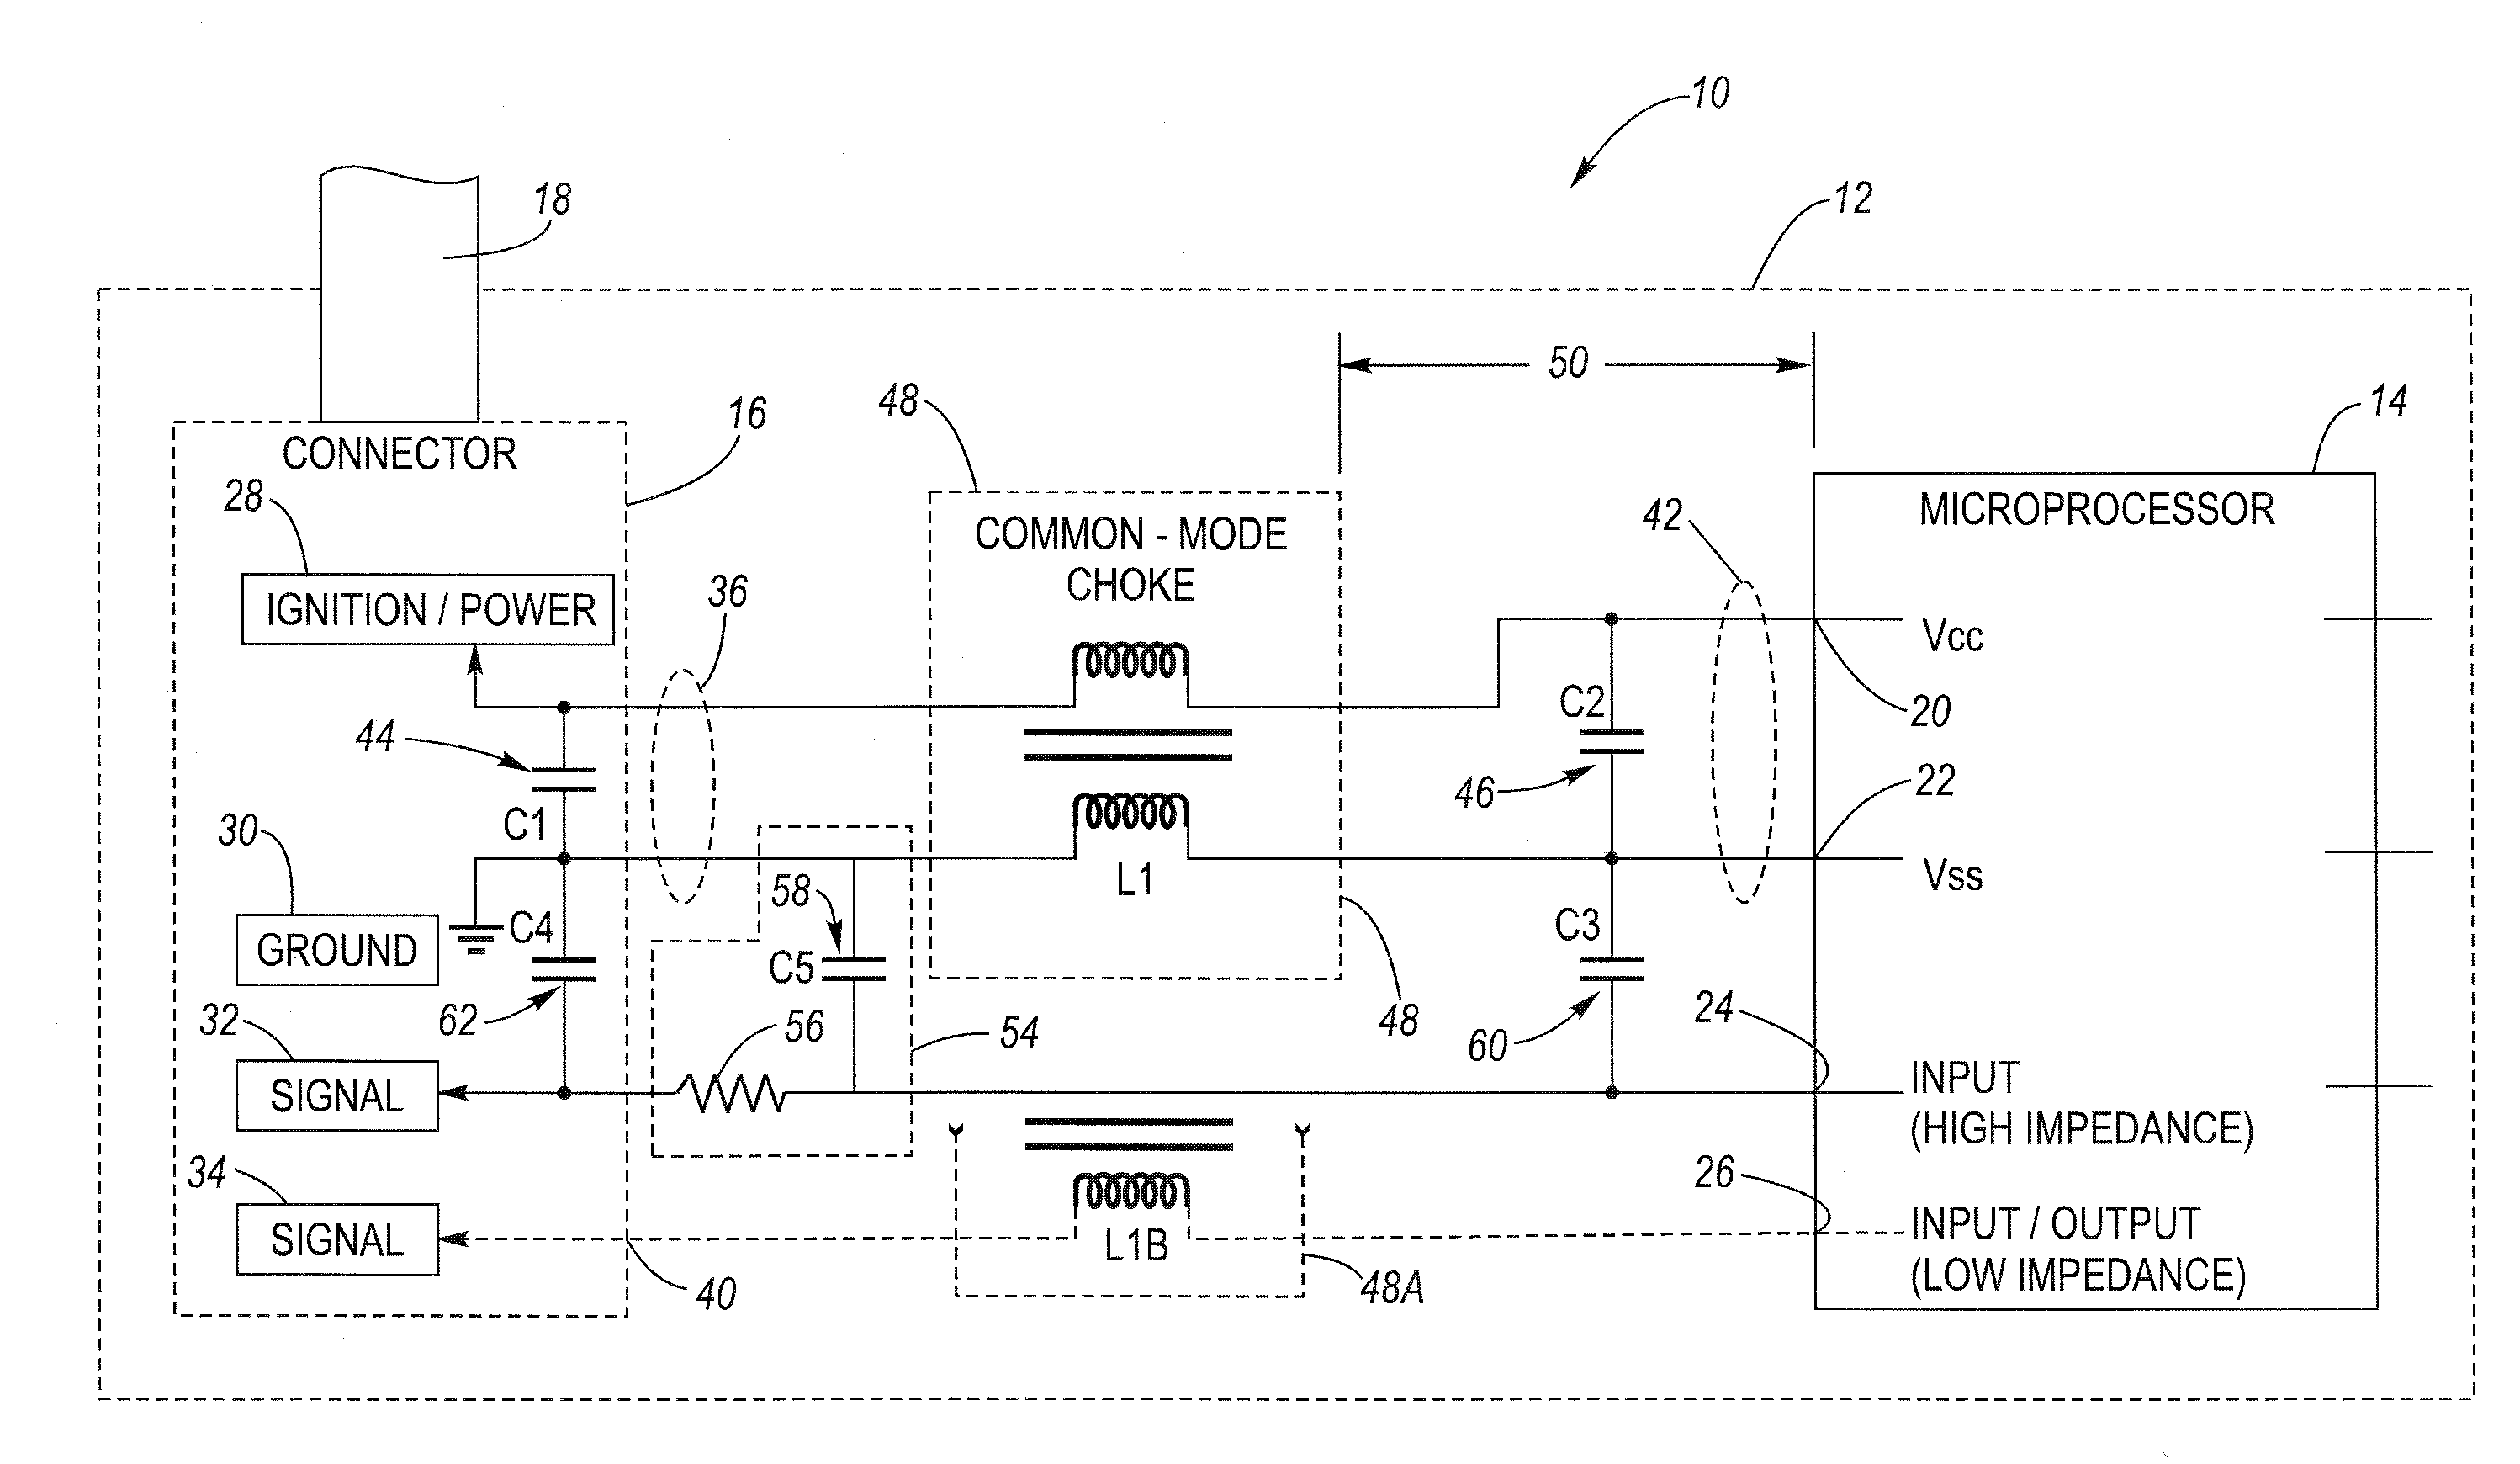 Microprocessor common-mode emissions reduction circuit